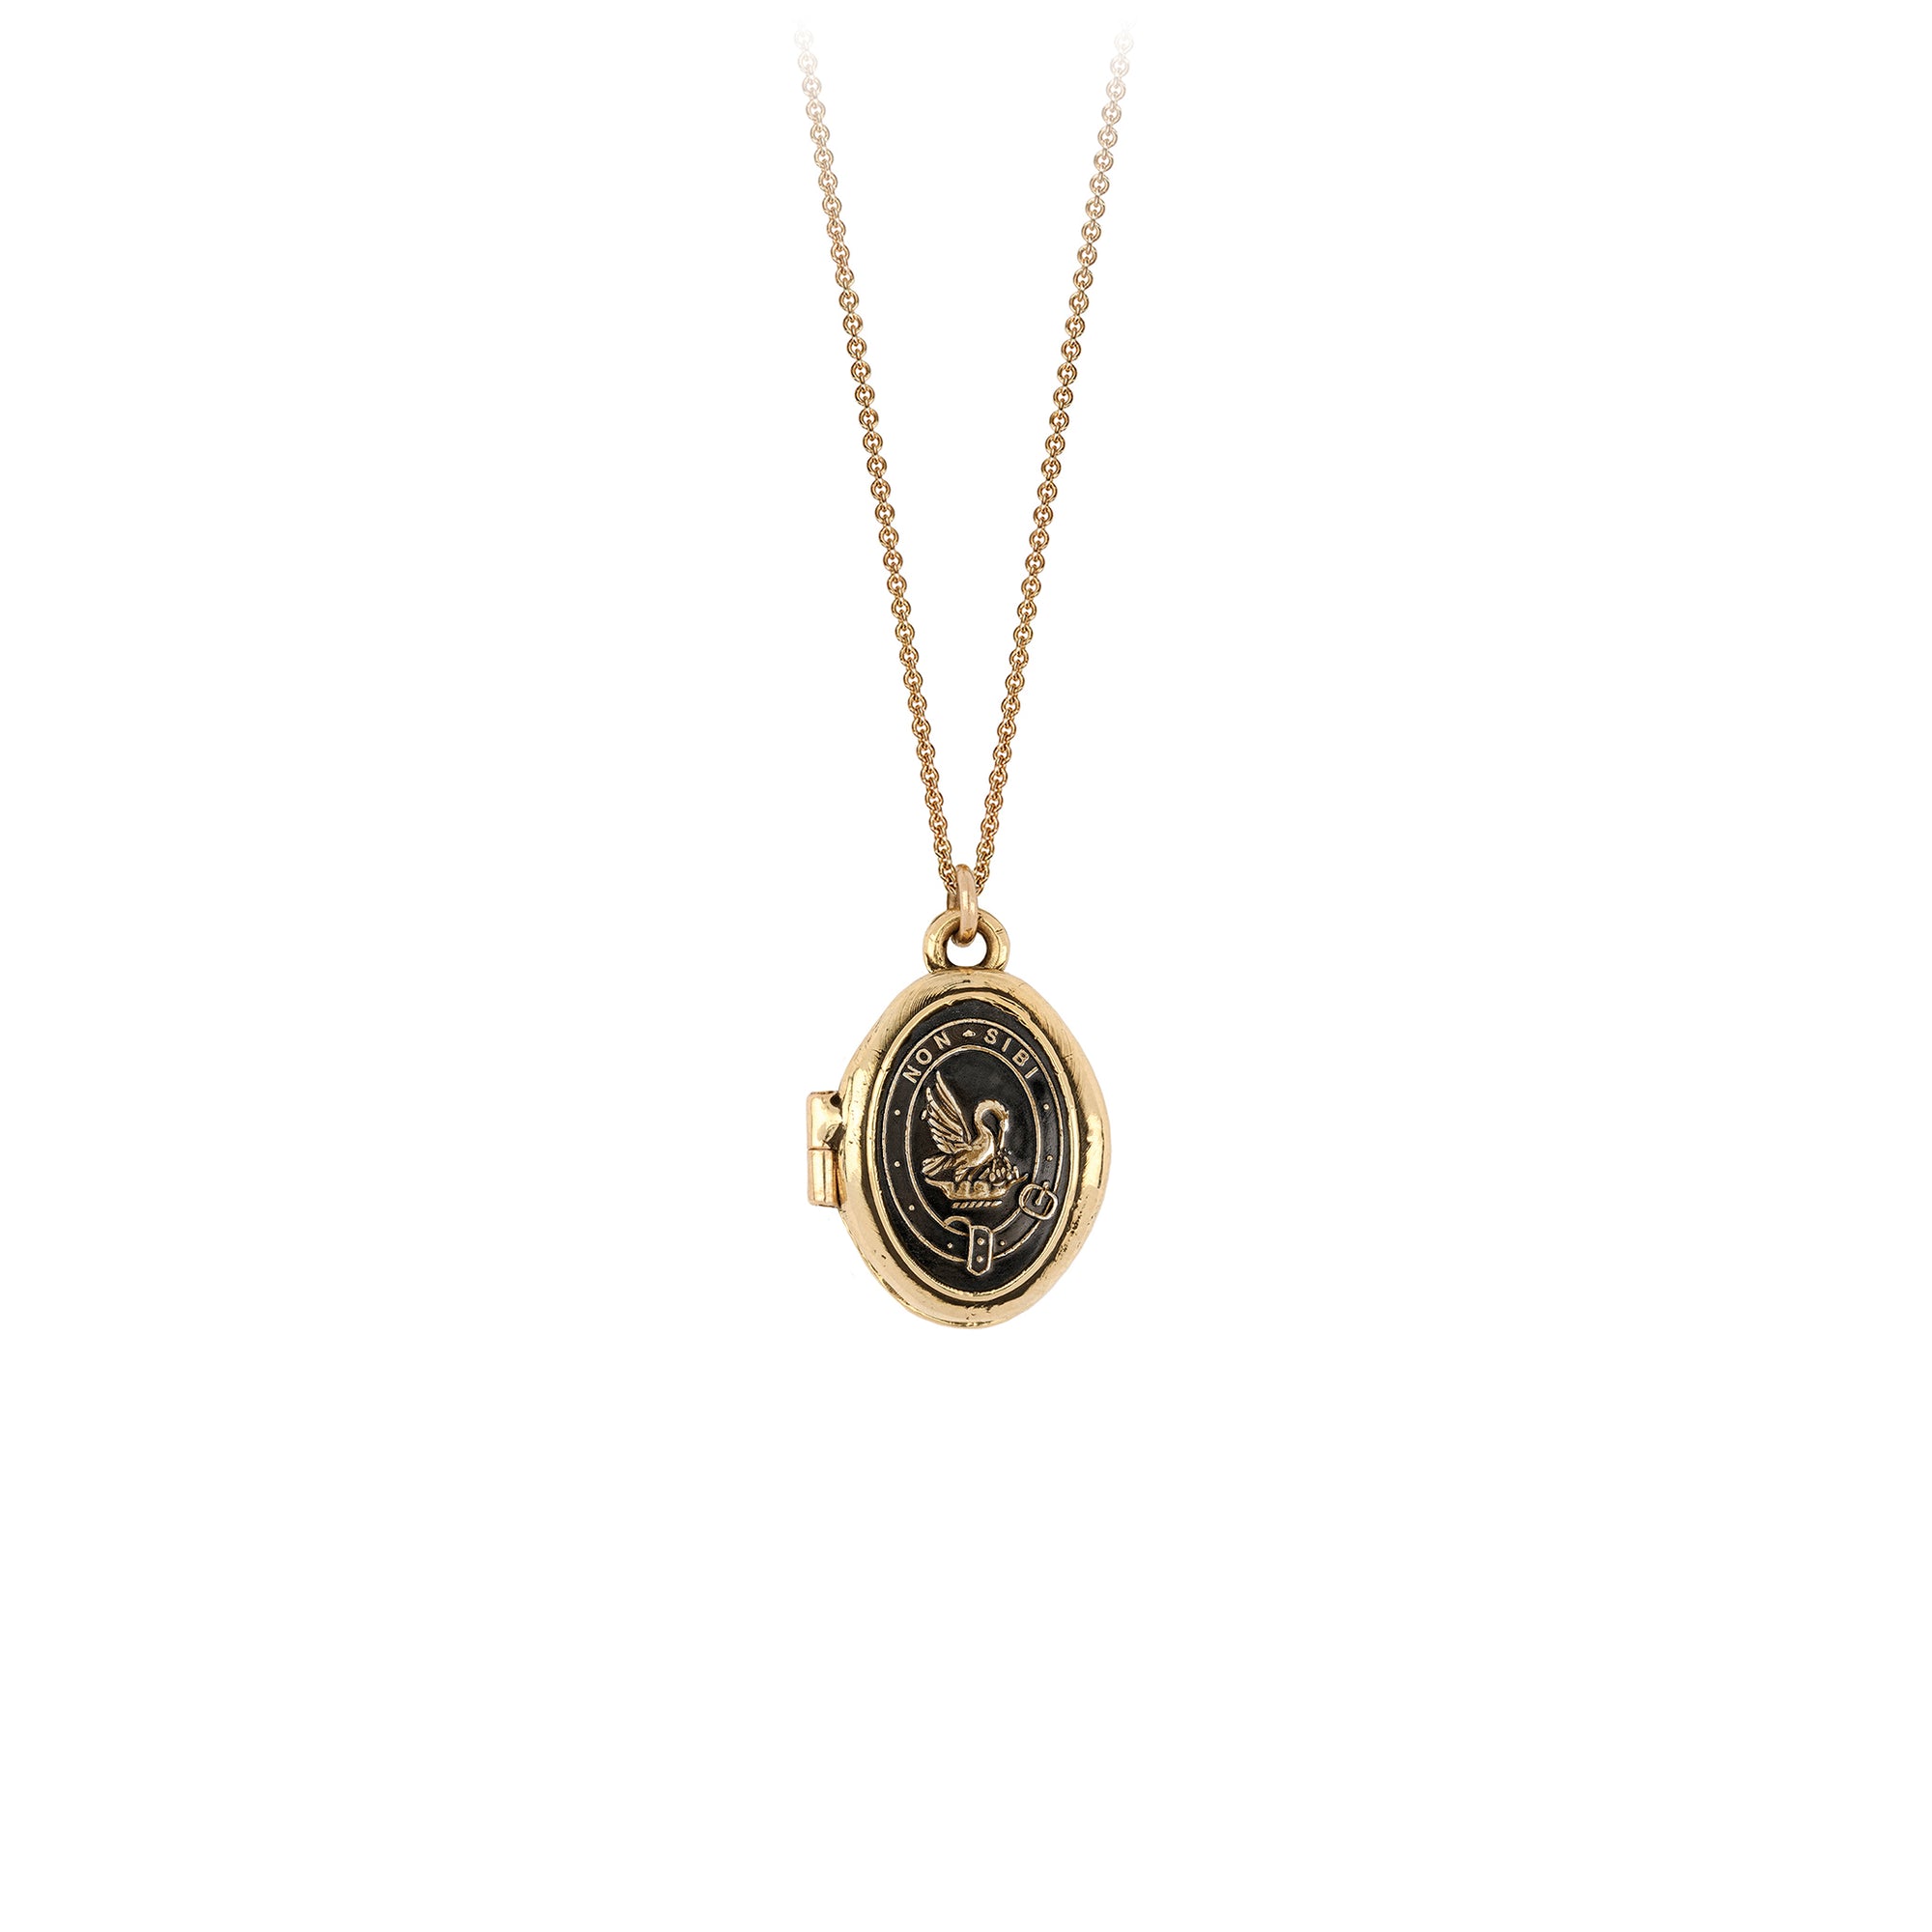 A 14k gold chain with our 14k gold Selflessness locket.